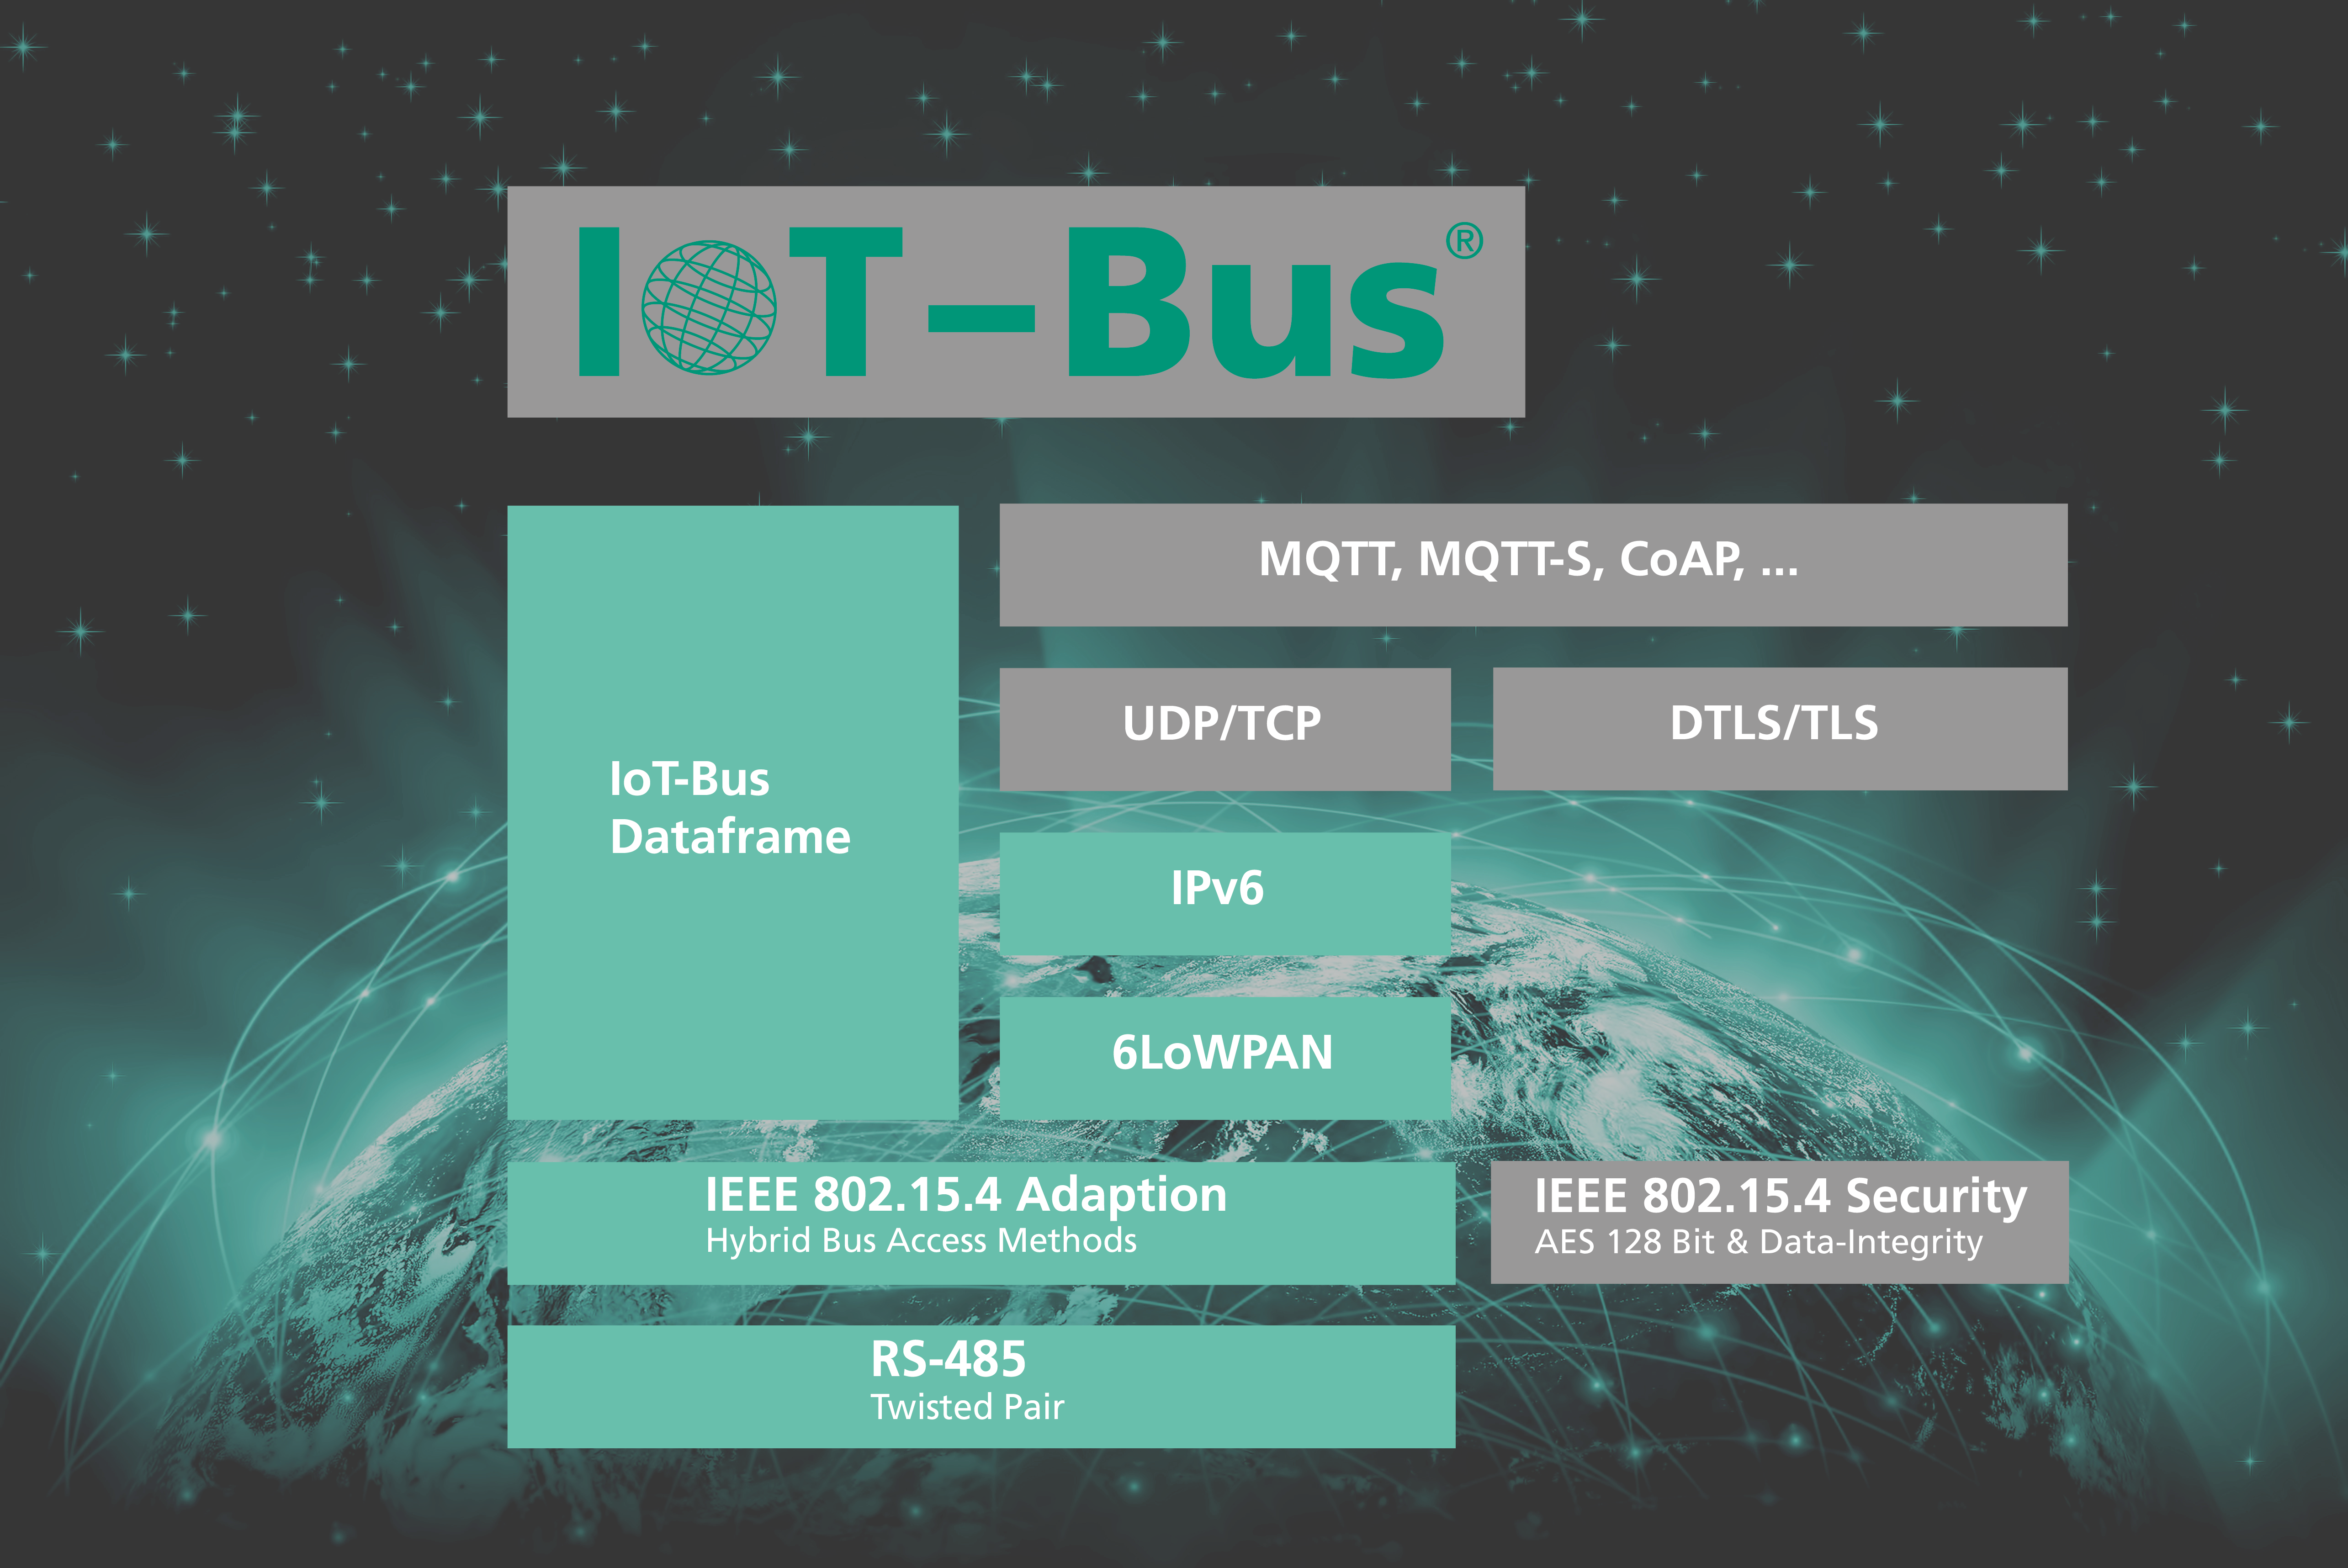 By using and adapting IEEE Std. 802.15.4, the IoT-Bus enables a cross-media communication channel. 